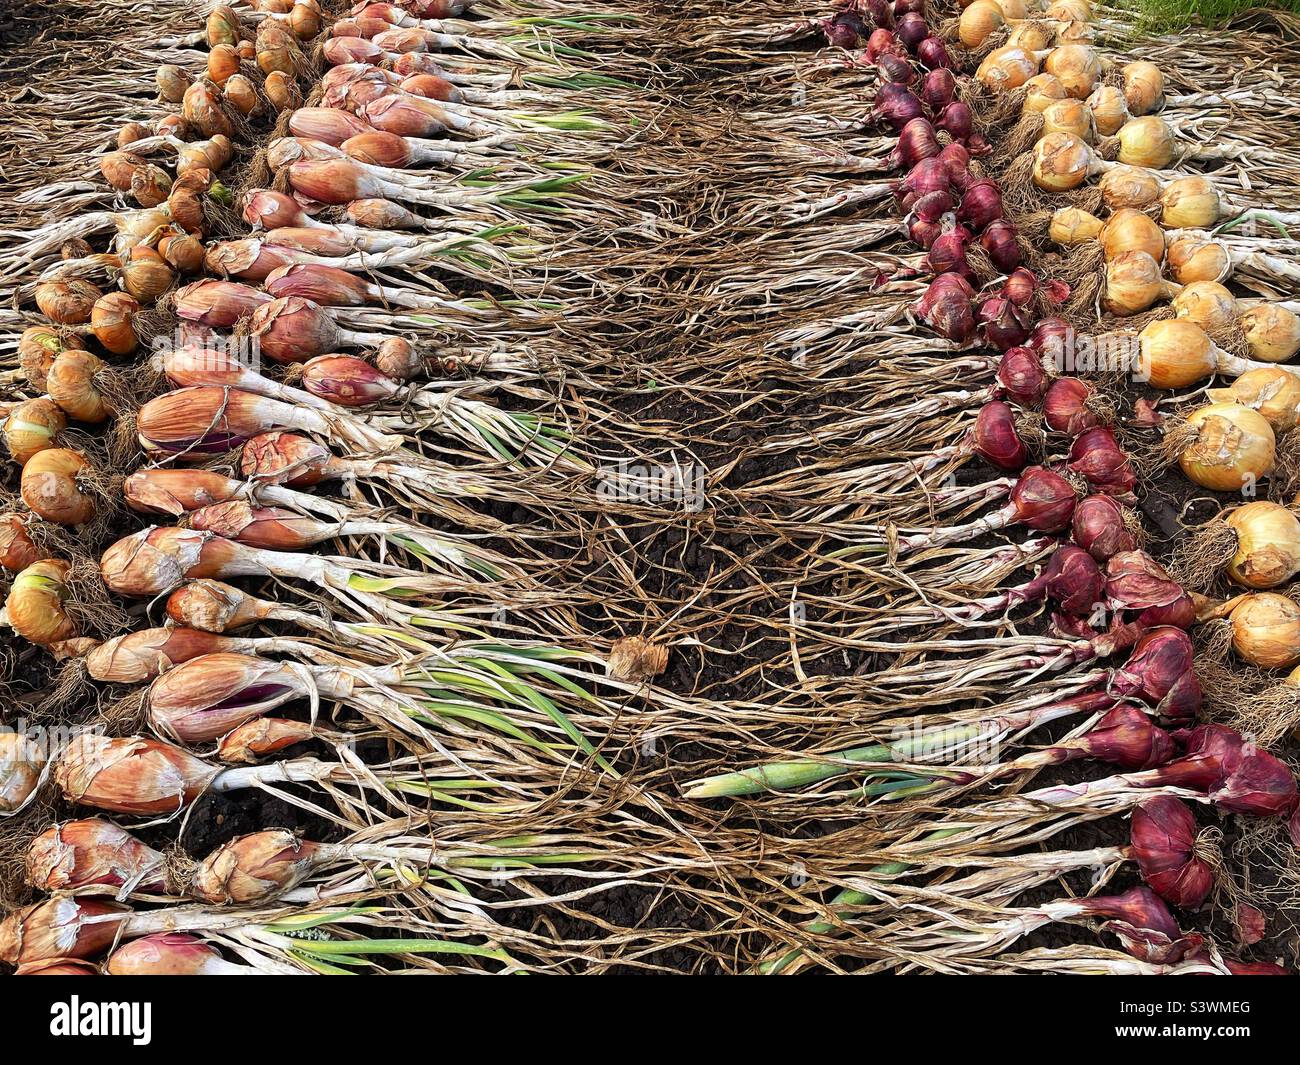 Rows of onions laid out to dry after digging up. August. Stock Photo